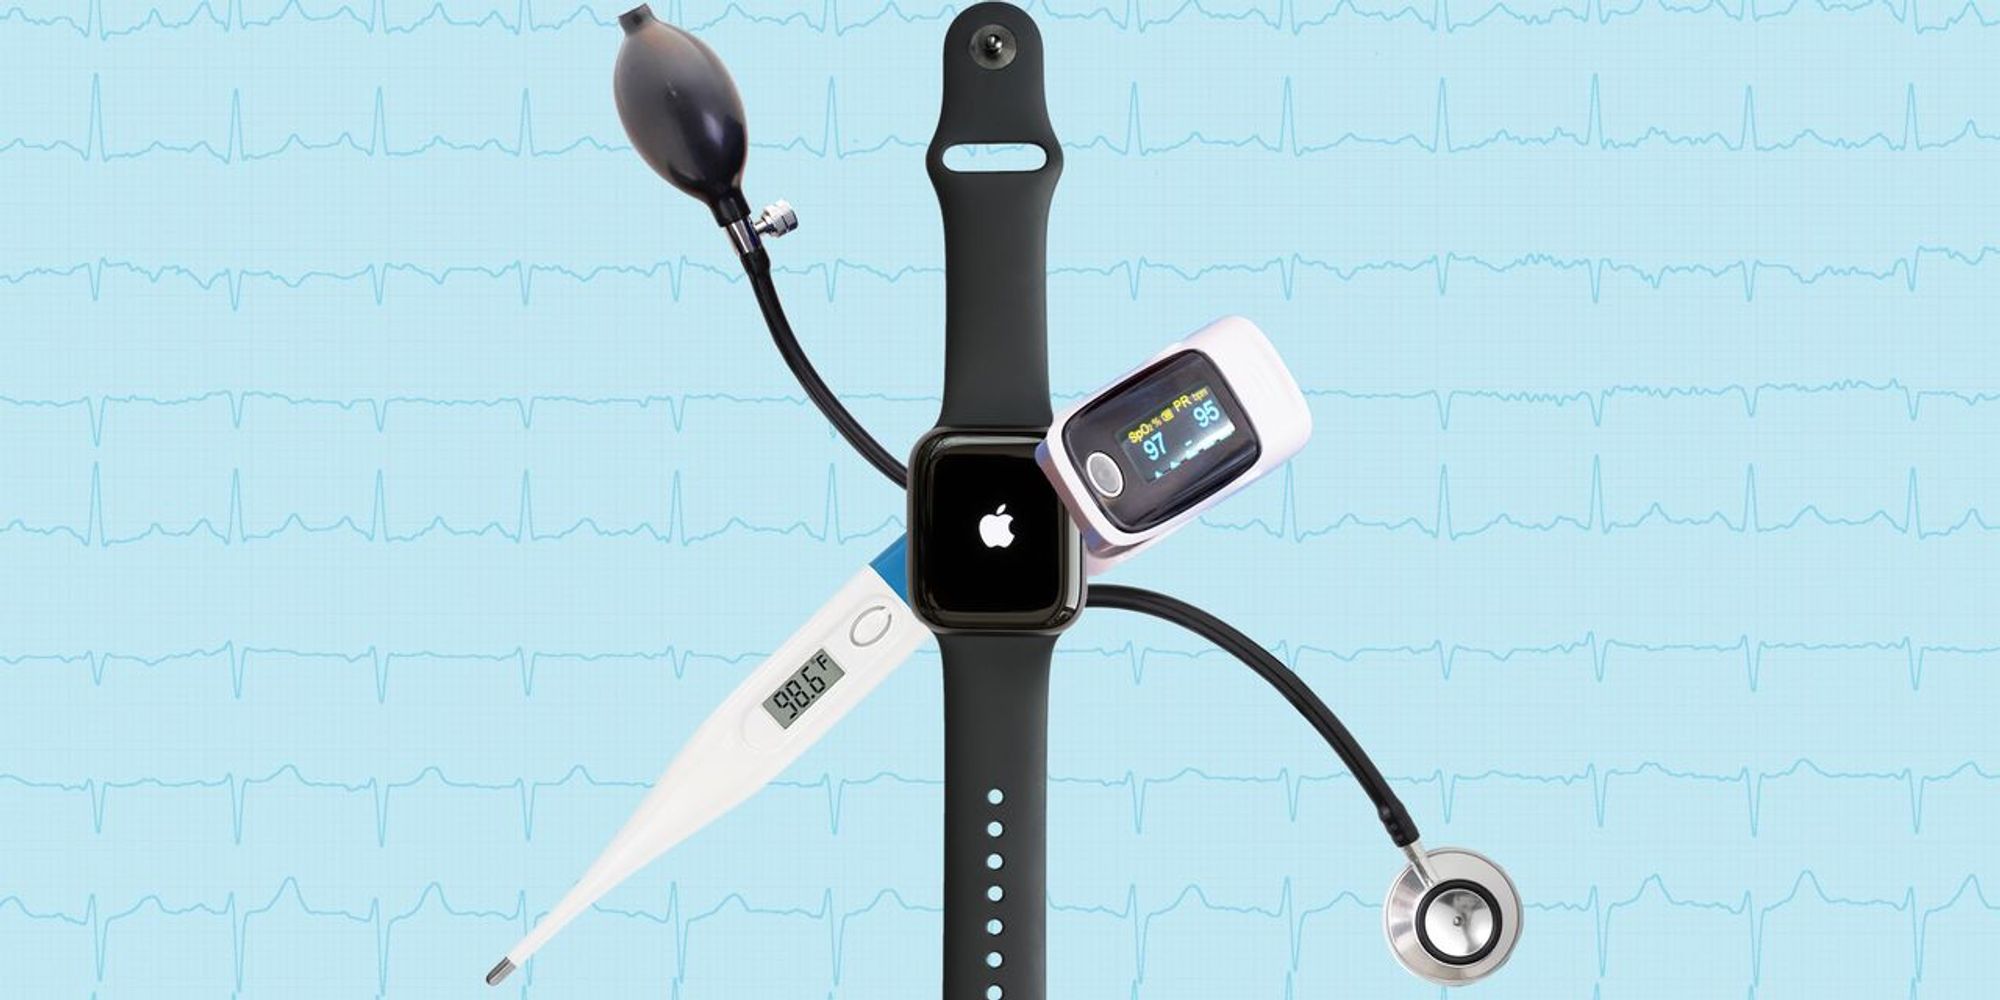 WSJ News Exclusive | Apple Plans Blood-Pressure Measure, Wrist Thermometer in Apple Watch